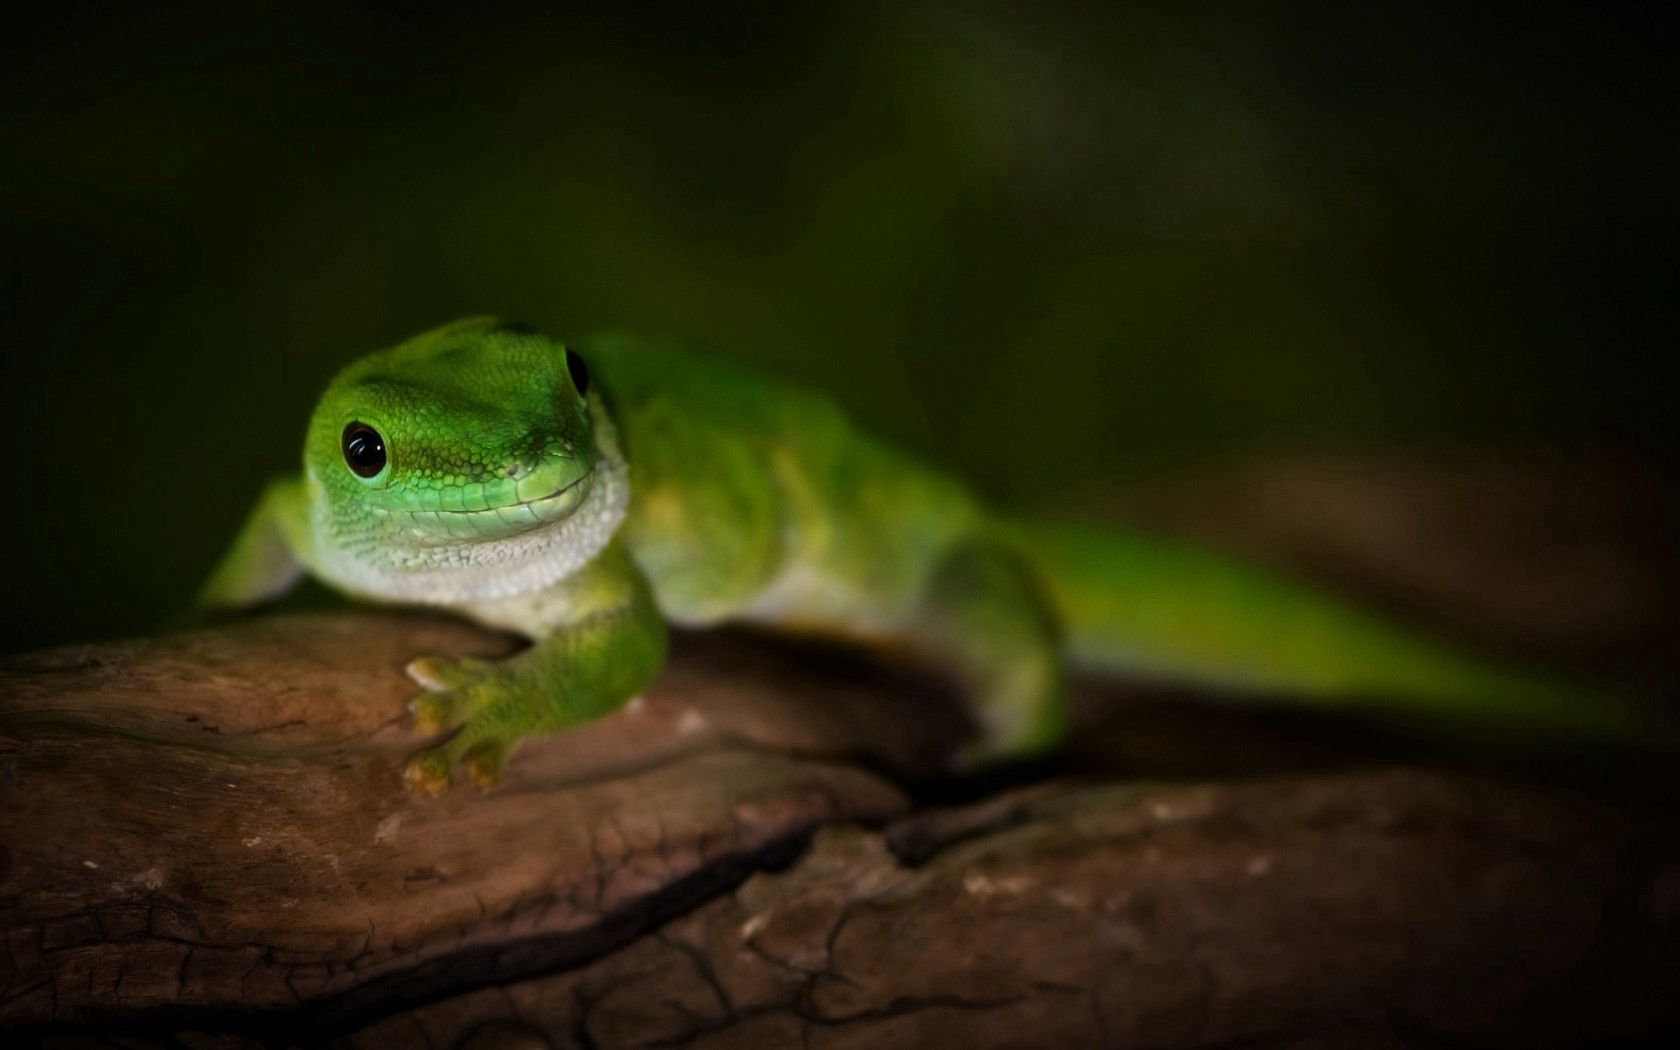 150014 download wallpaper animals, madagascar, green, macro, wood, tree, lizard, day, gecko screensavers and pictures for free